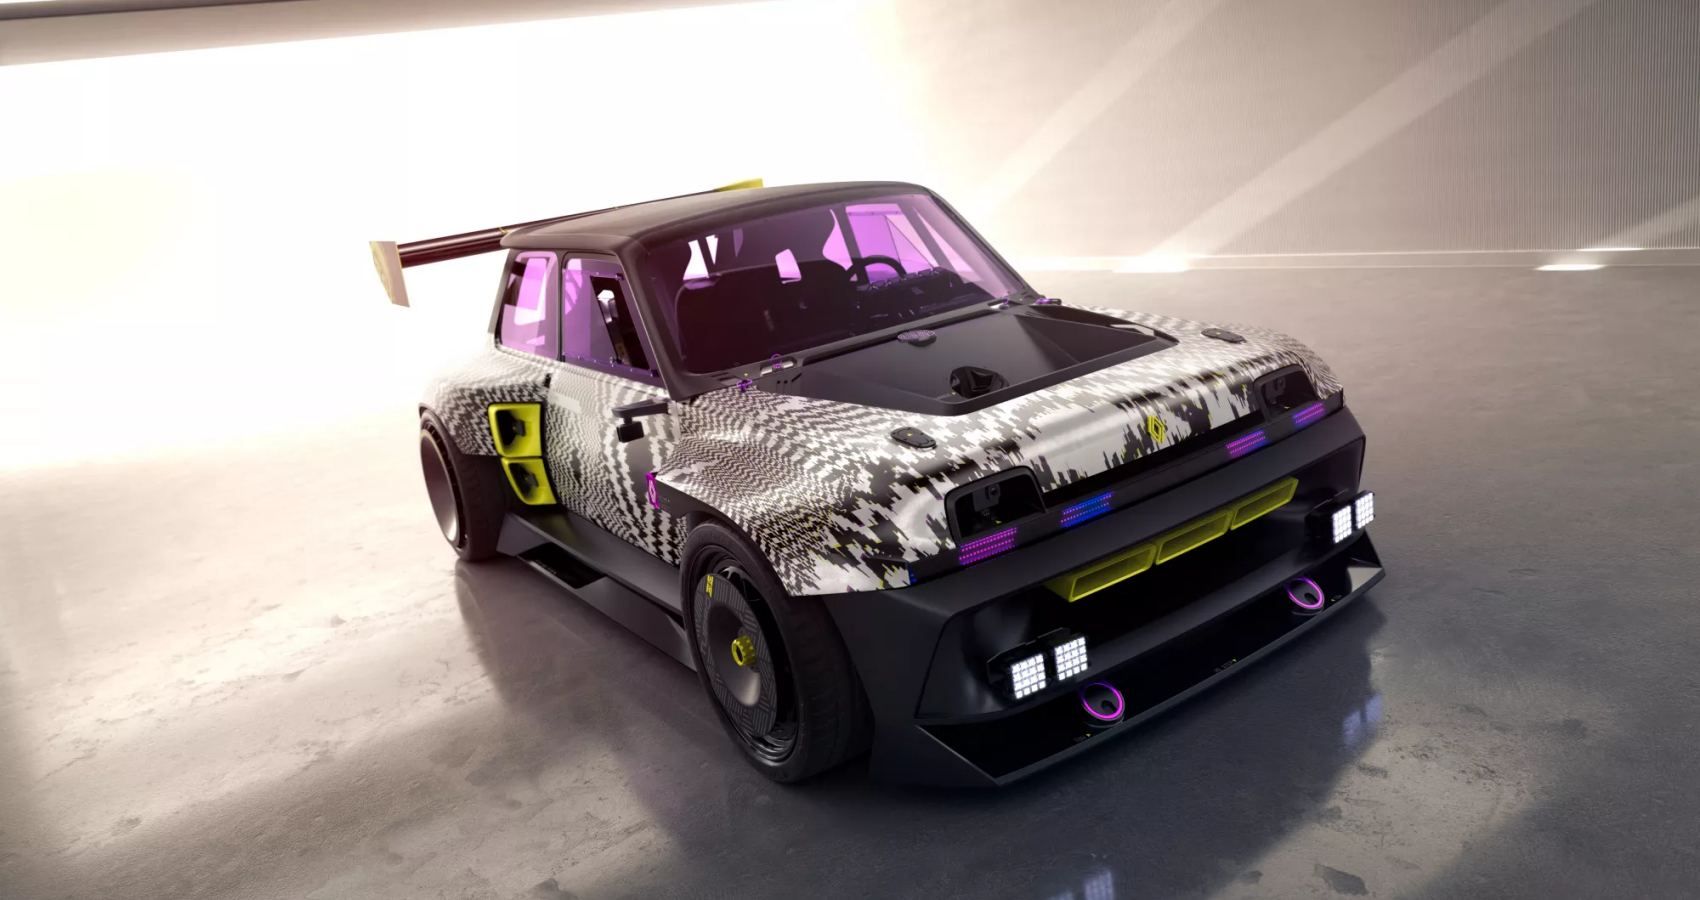 The Renault R5 Turbo 3E Concept Is A 375-HP Drift Machine We Badly Want To Be Real